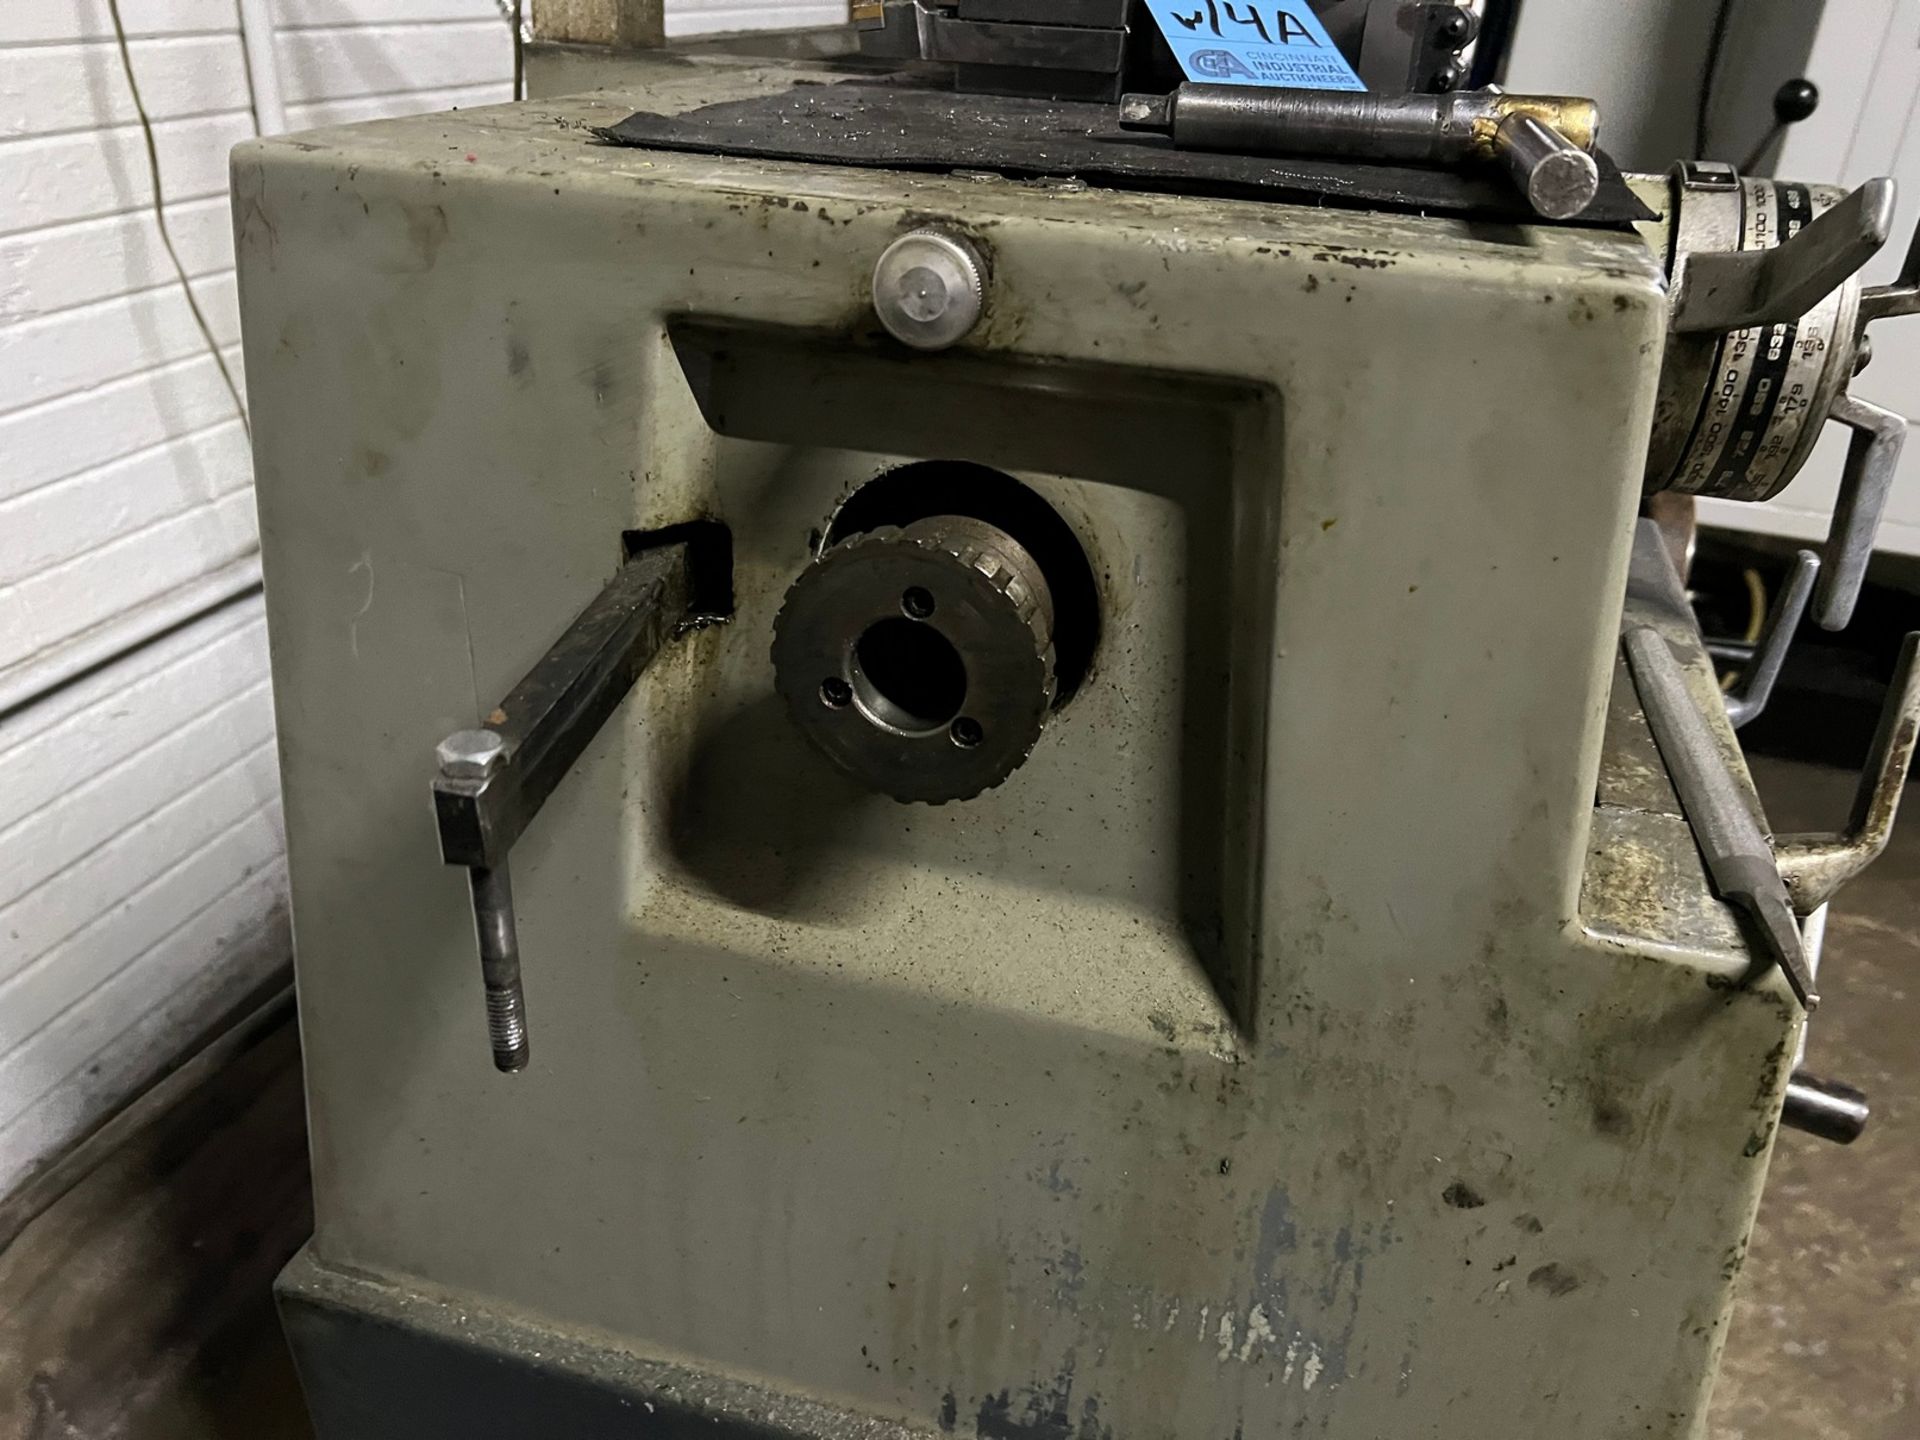 13" X 30" CLAUSING MODEL 1300 TURRET LATHE; S/N 130203, 8" THREE-JAW CHUCK**For convenience, a - Image 5 of 11